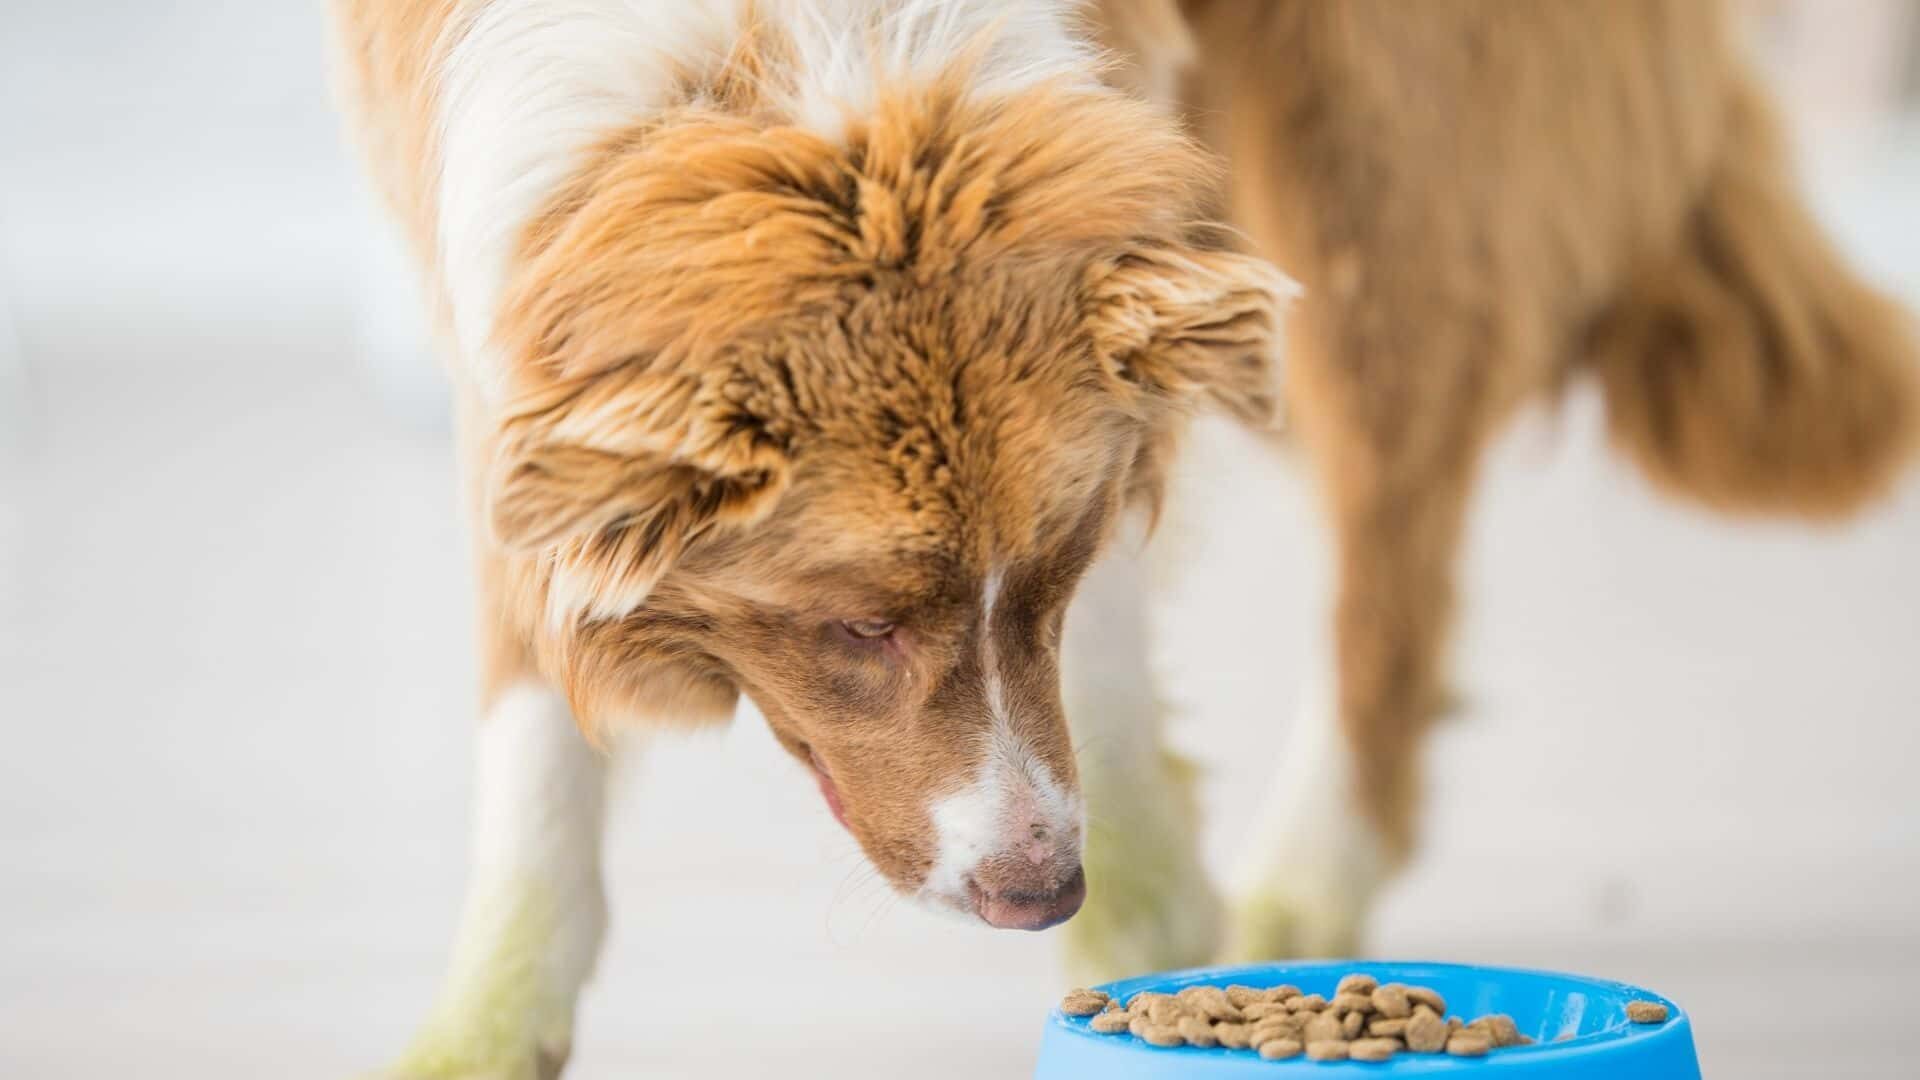 How long after eating do dogs poop?